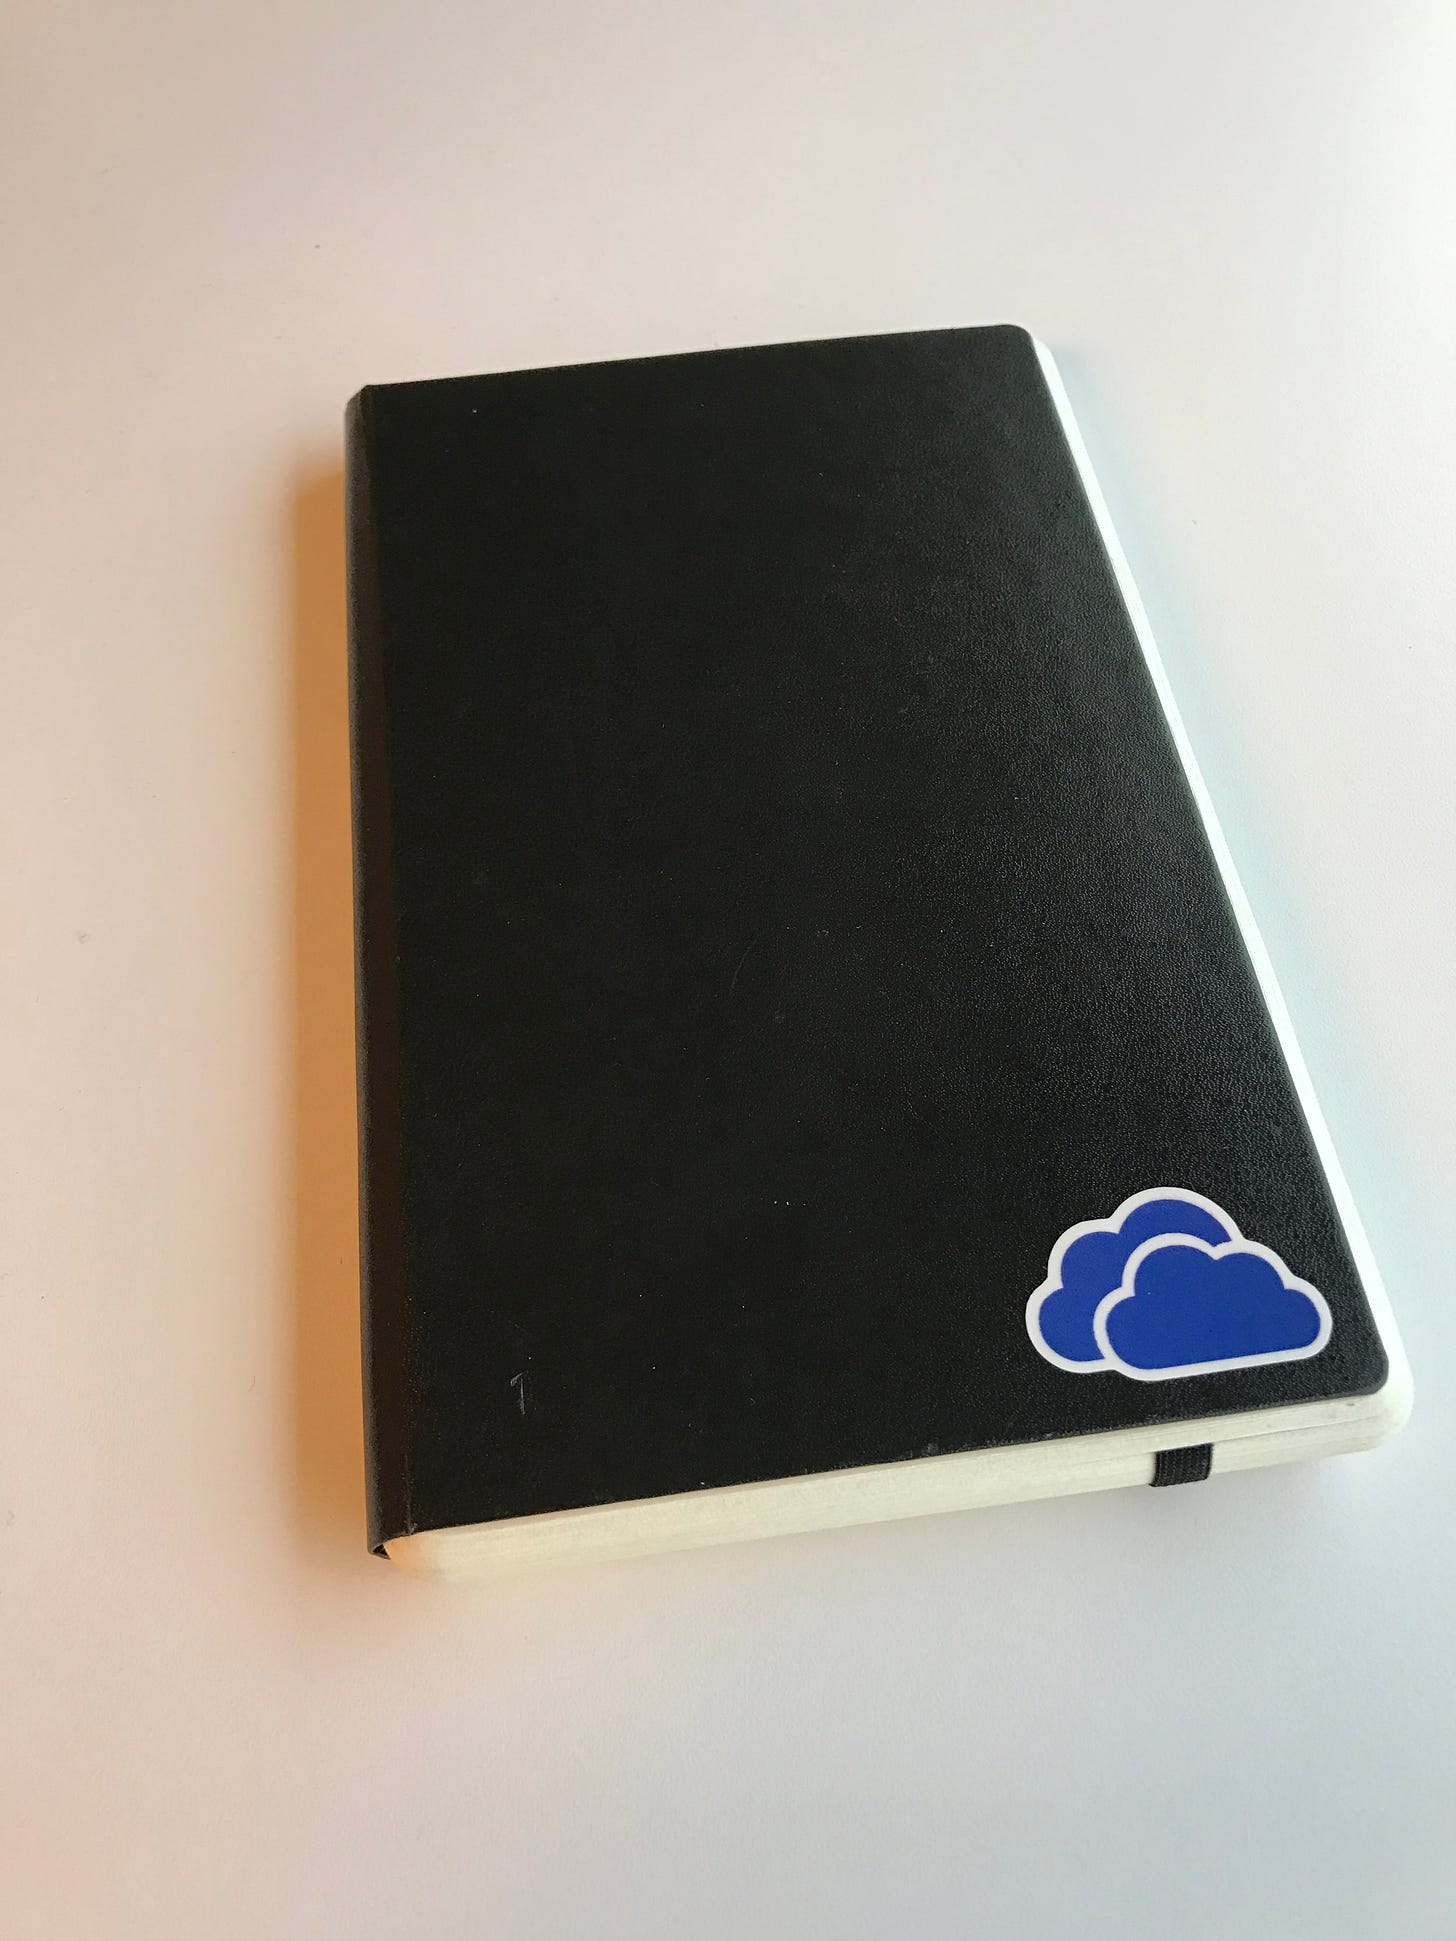 Here is the Moleskine tablet notebook